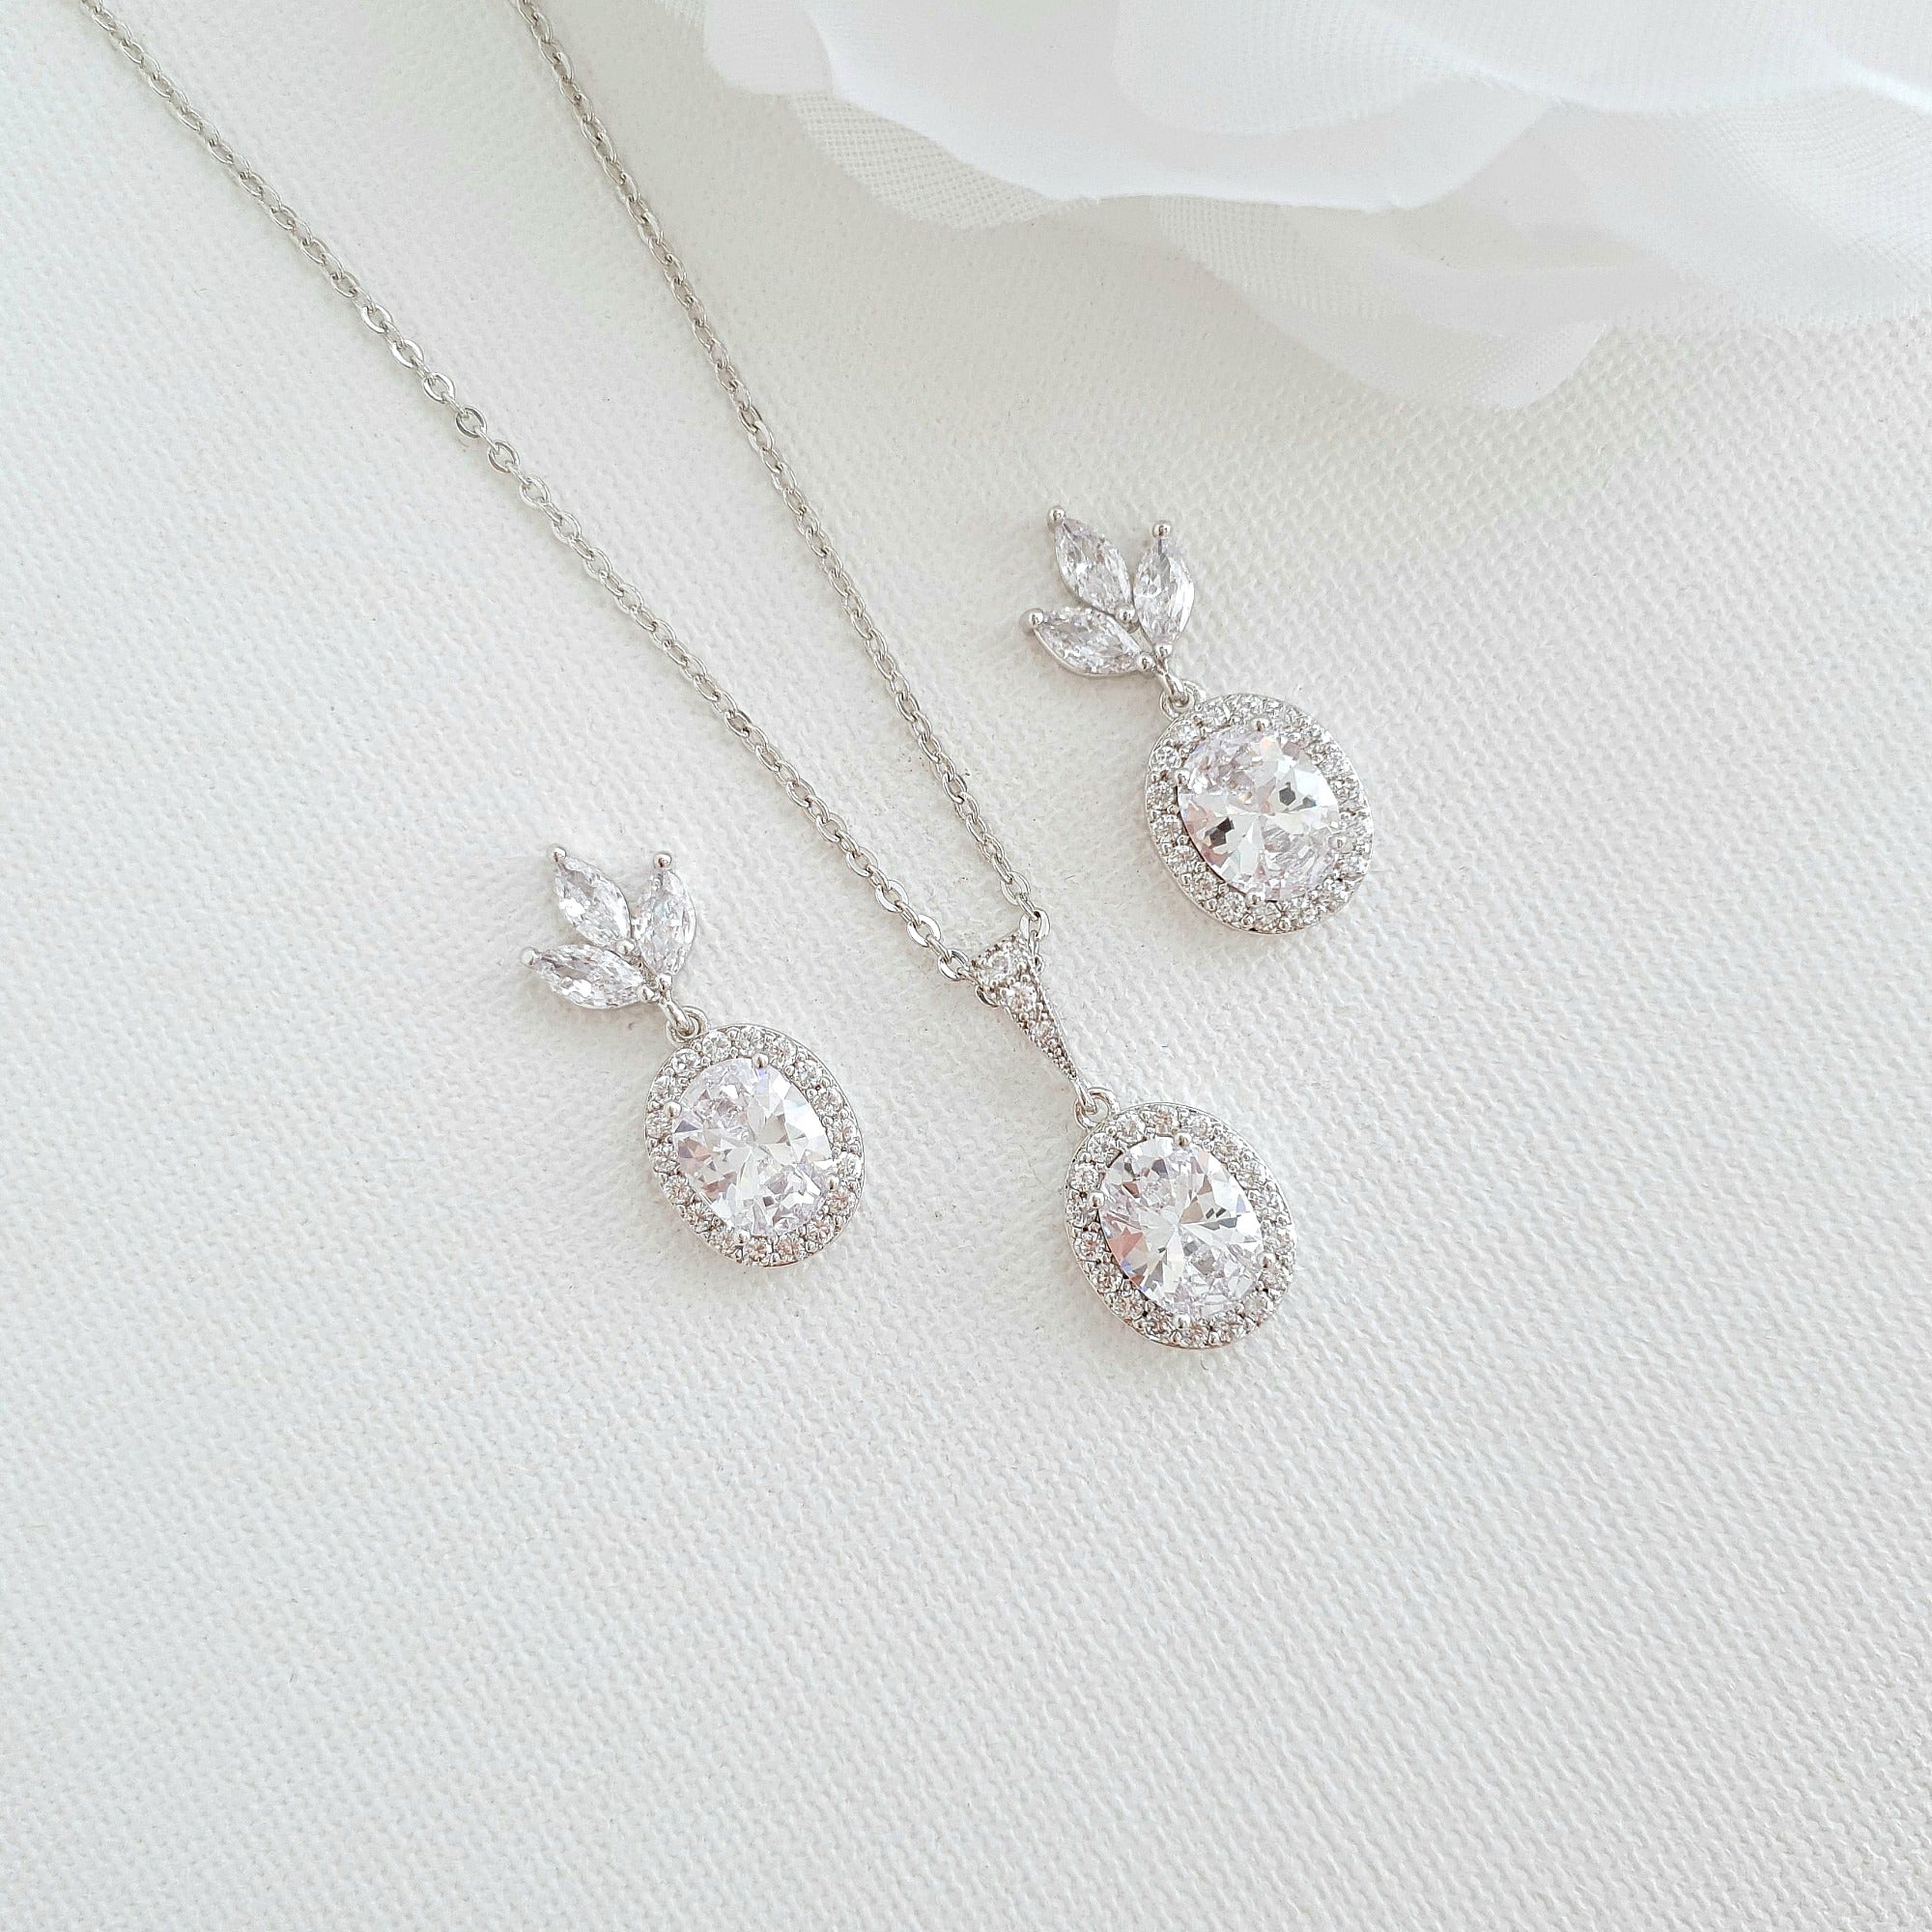 21 Bridesmaid Necklaces for Your Wedding Party